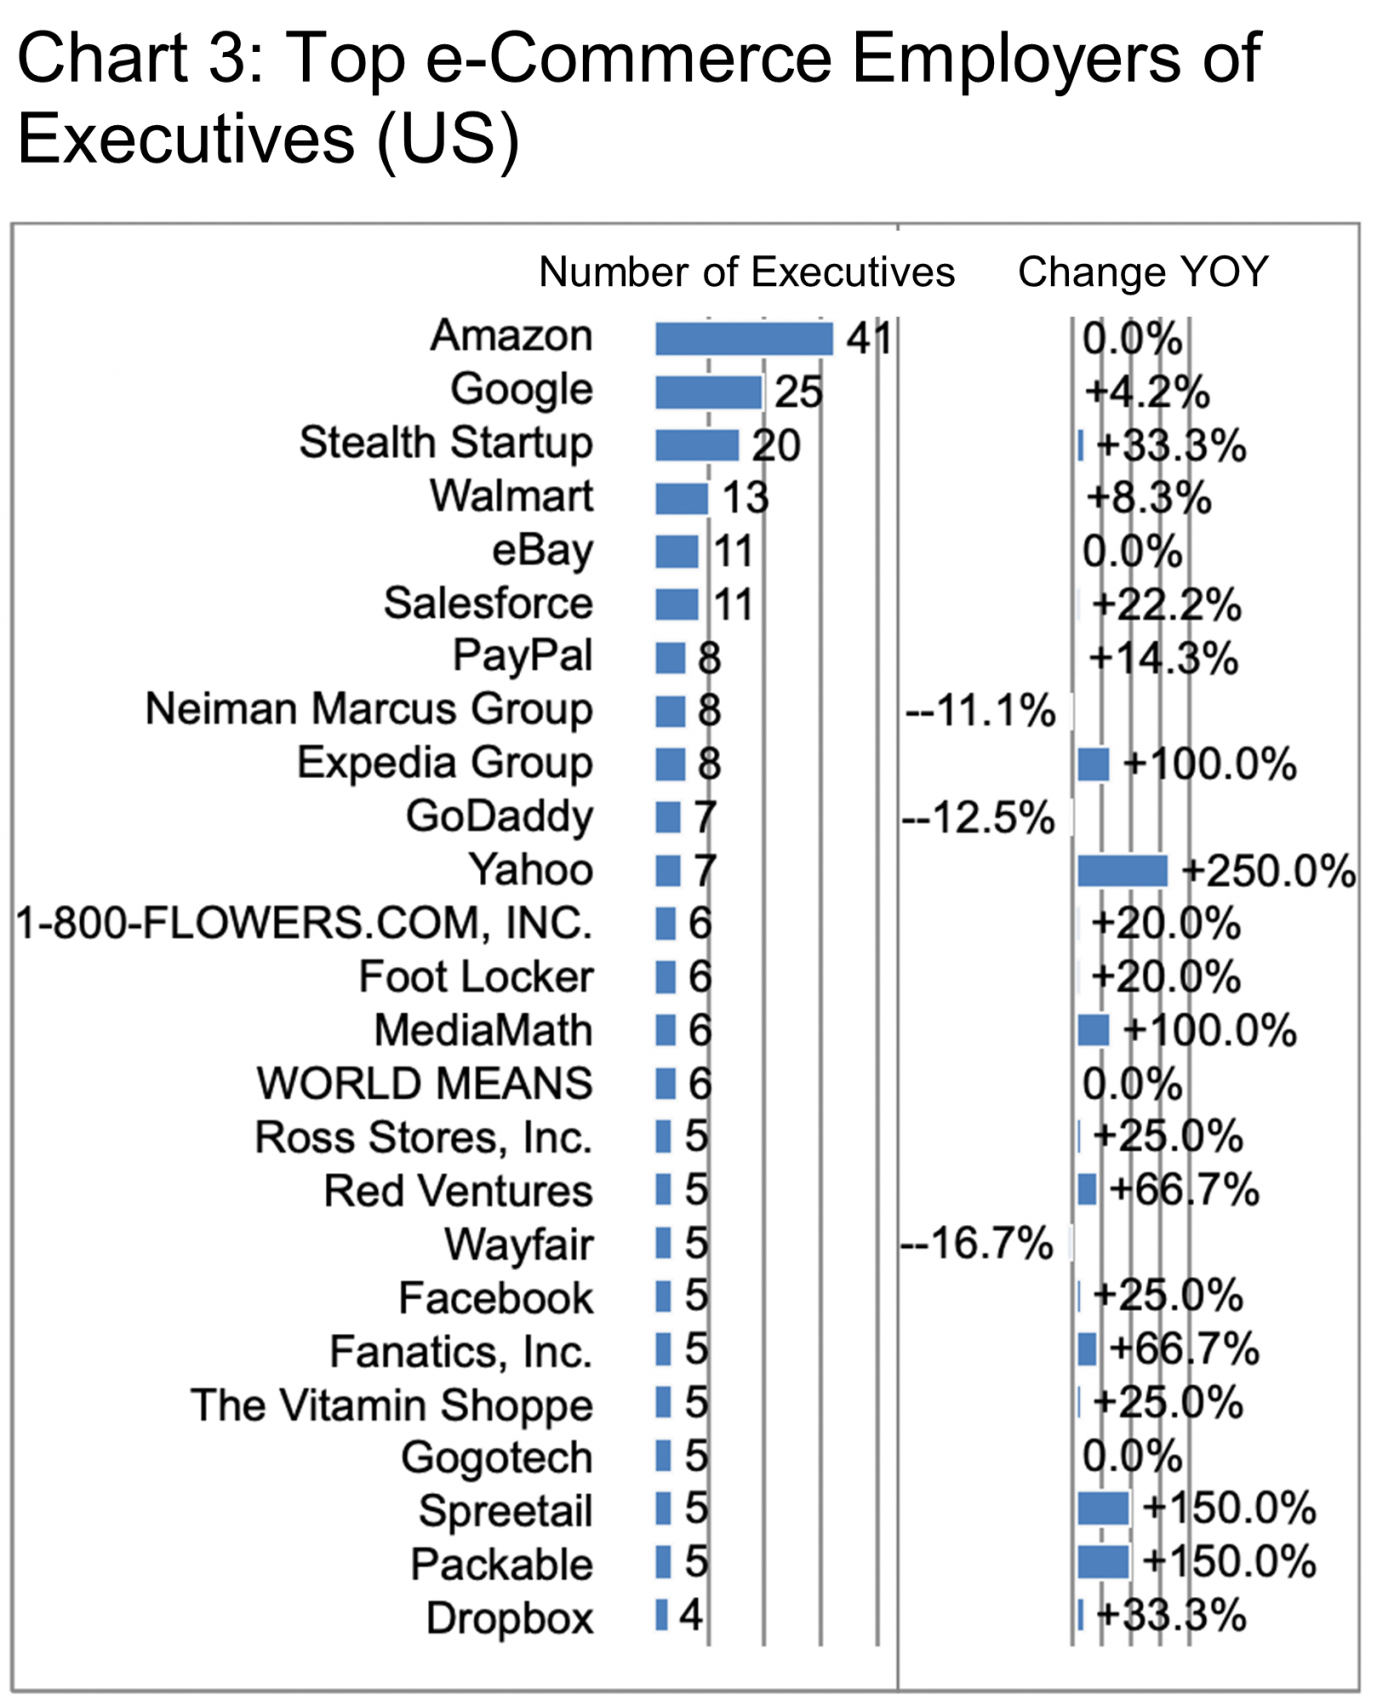 Top e-Commerce Employers of Executives (US) Chart 3.